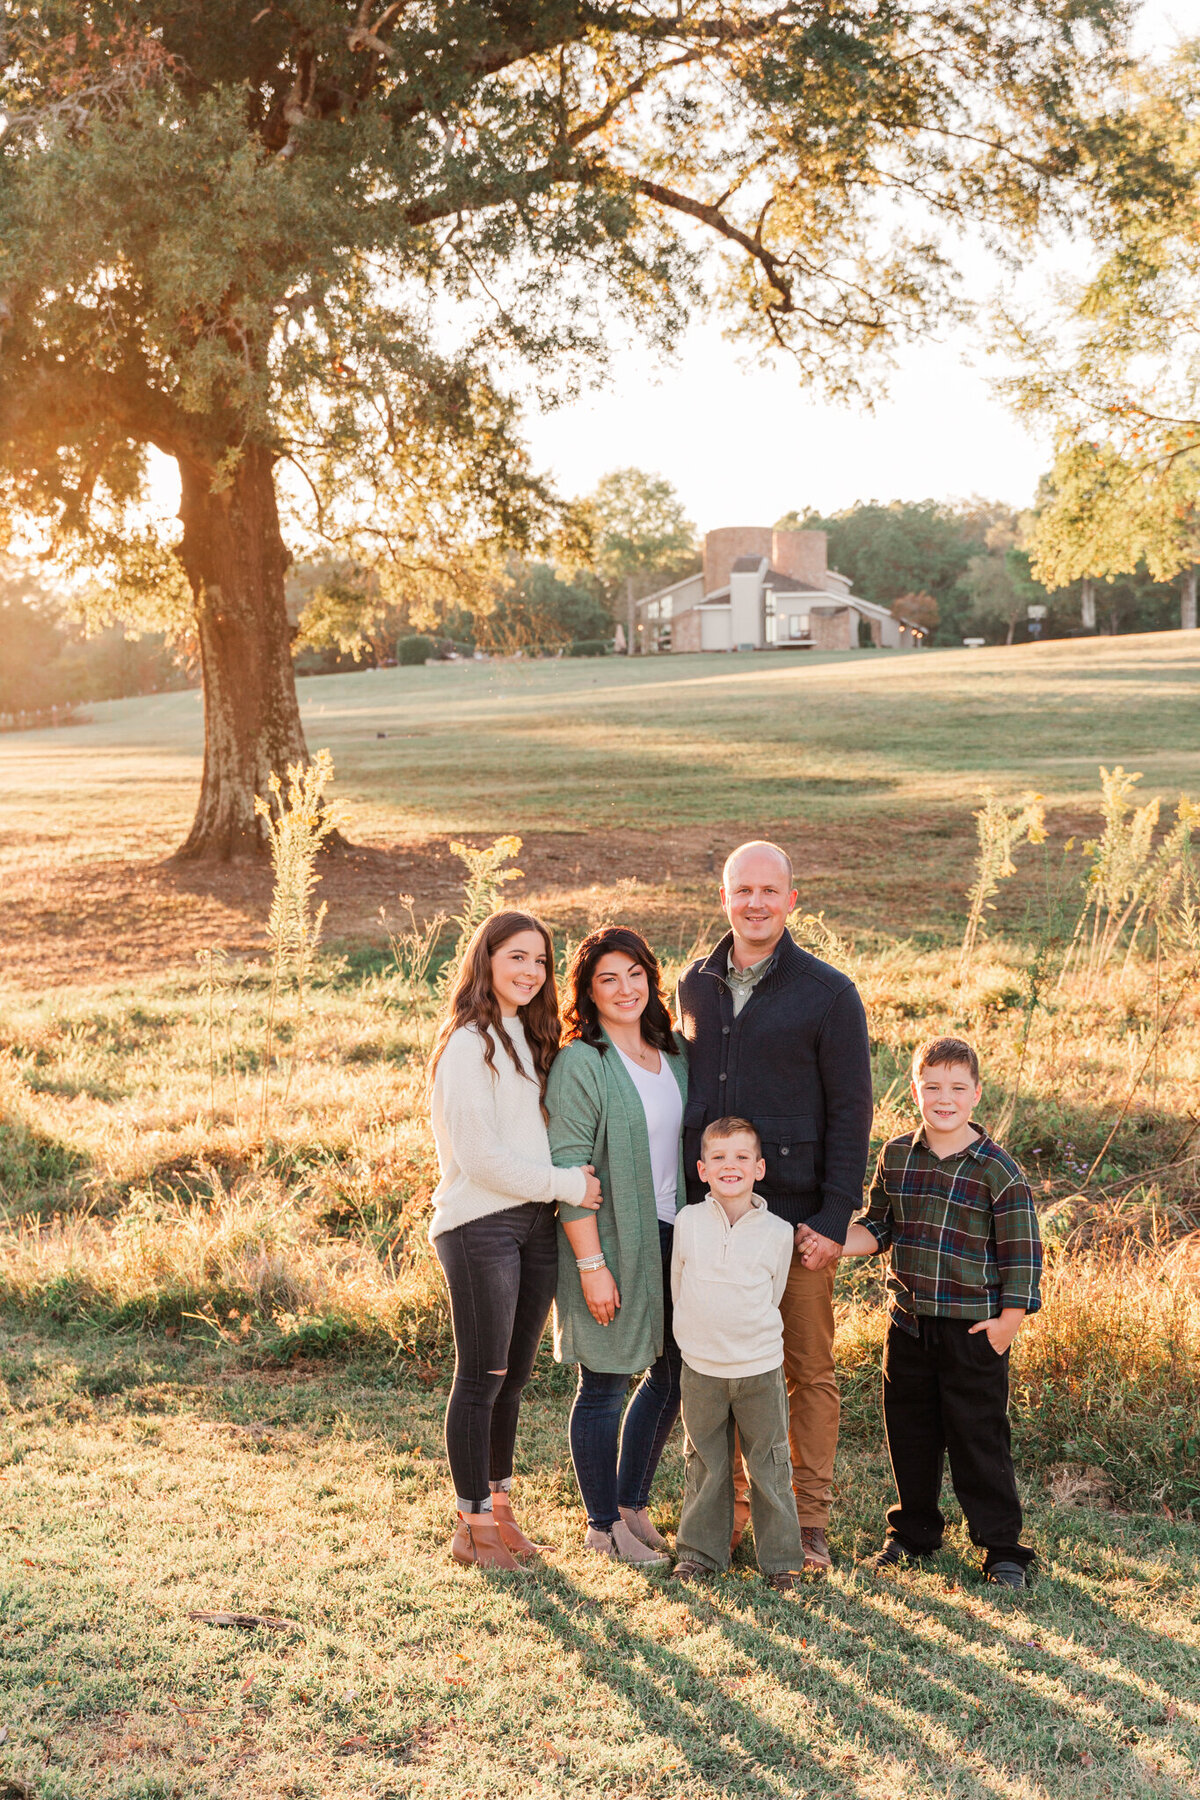 family in a field as the sun set with a tree and home in the background